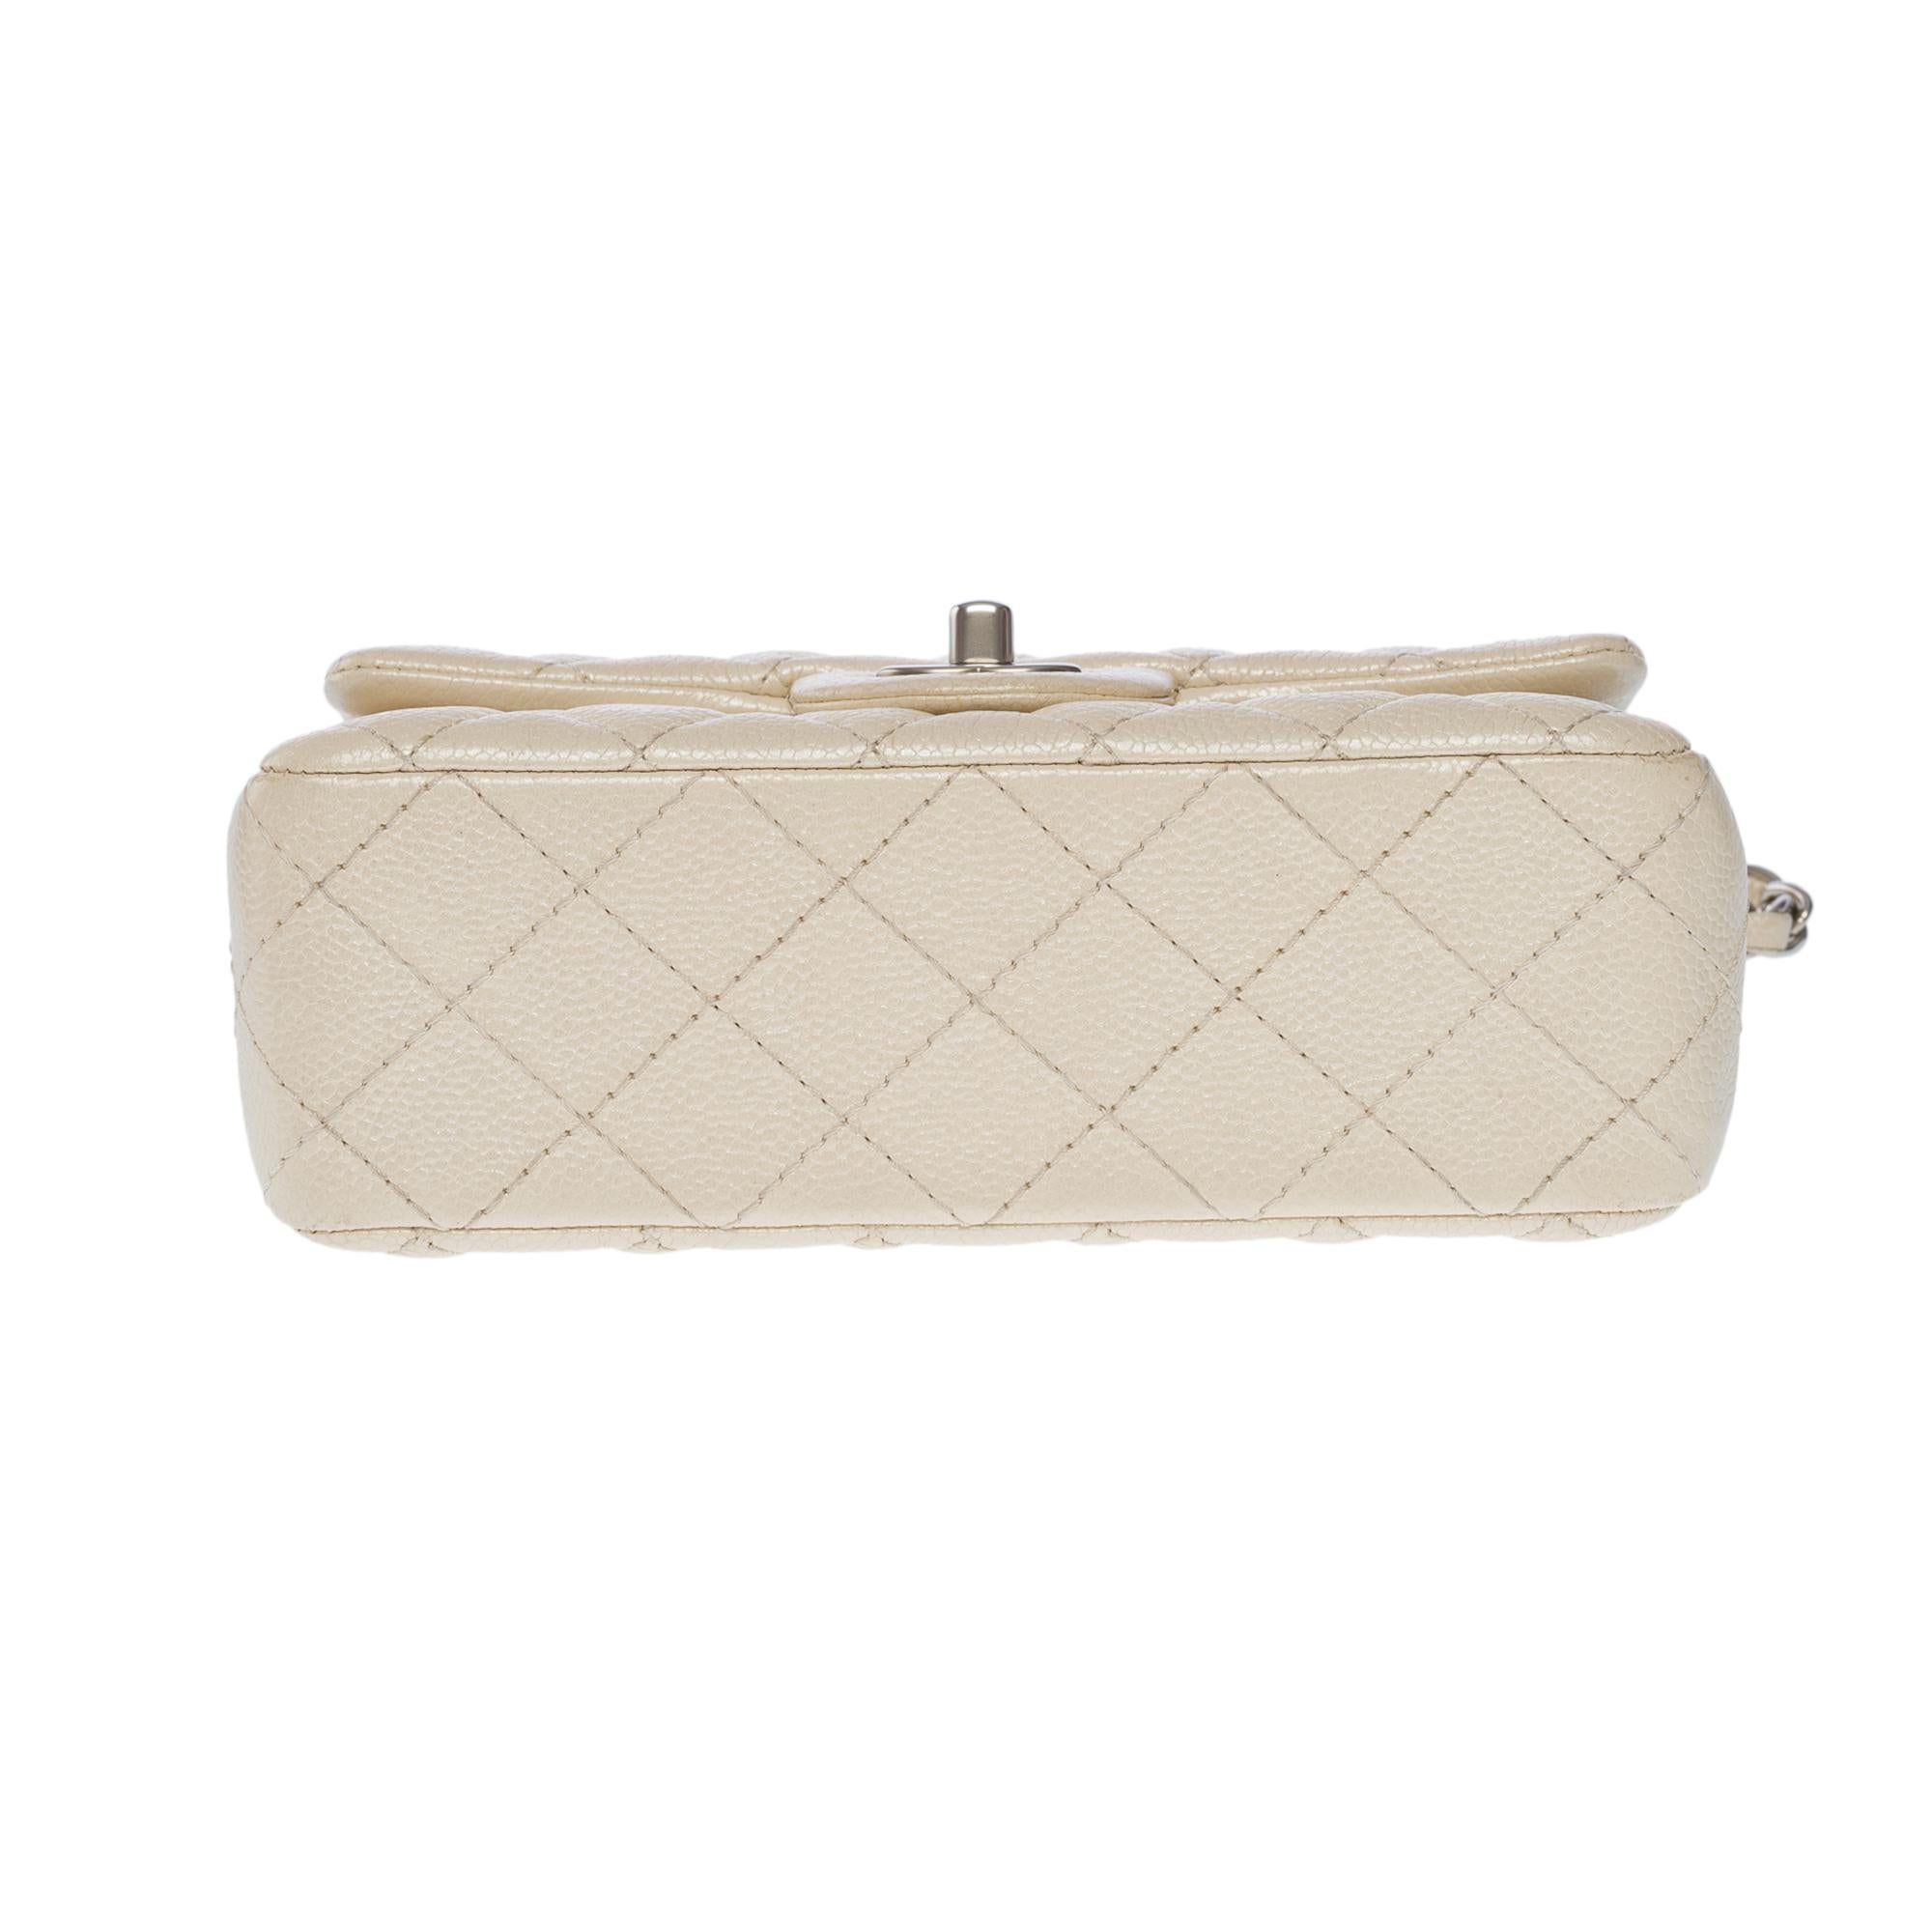 Splendid Chanel Timeless Mini Flap bag in off white pearl quilted leather, SHW For Sale 6